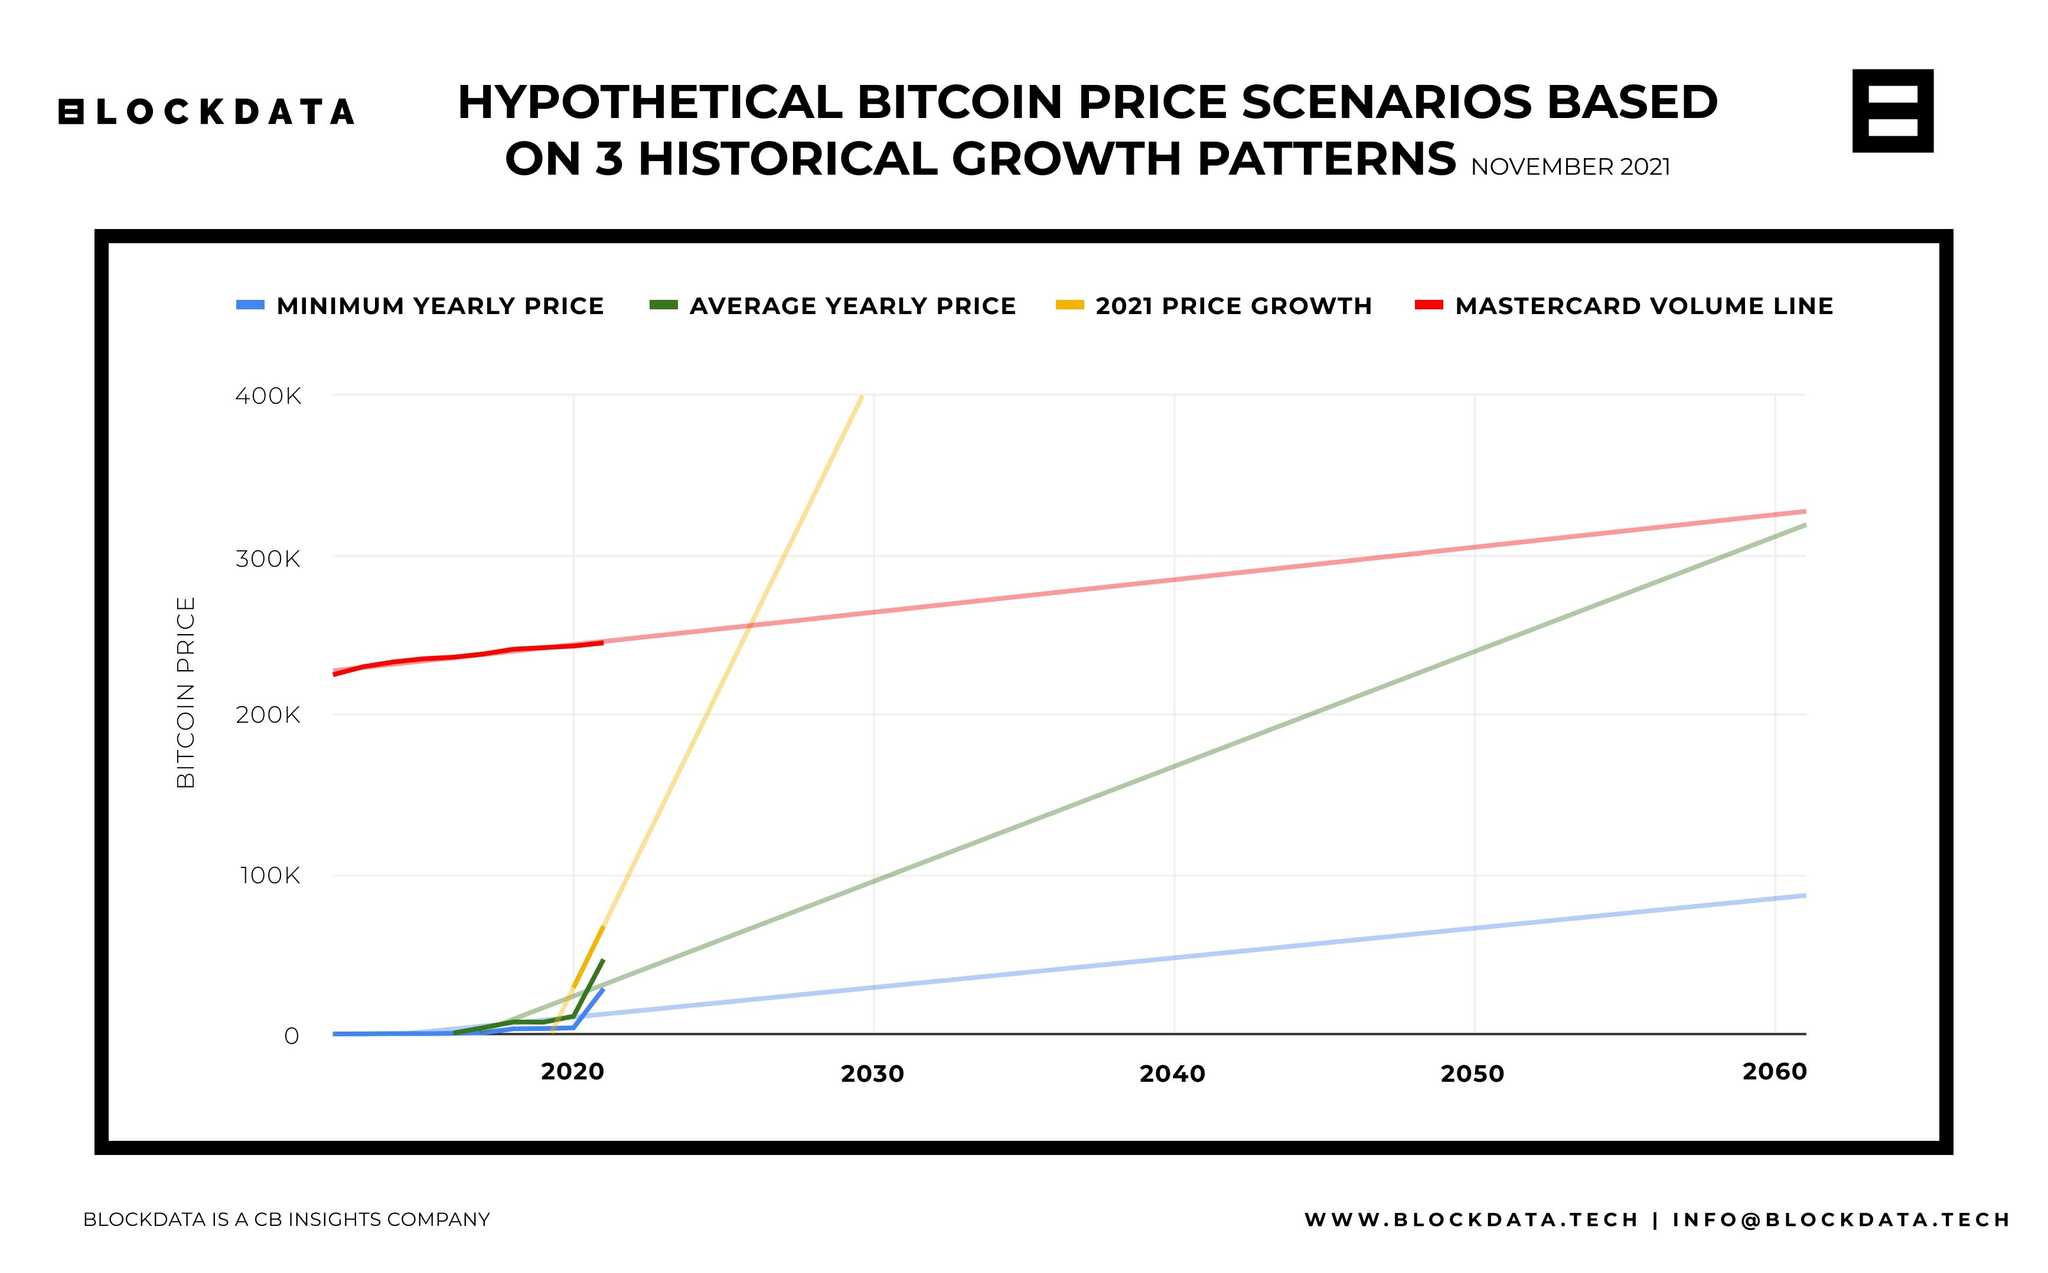 Hypothetical bitcoin price scenarios based on 3 historical growth patterns